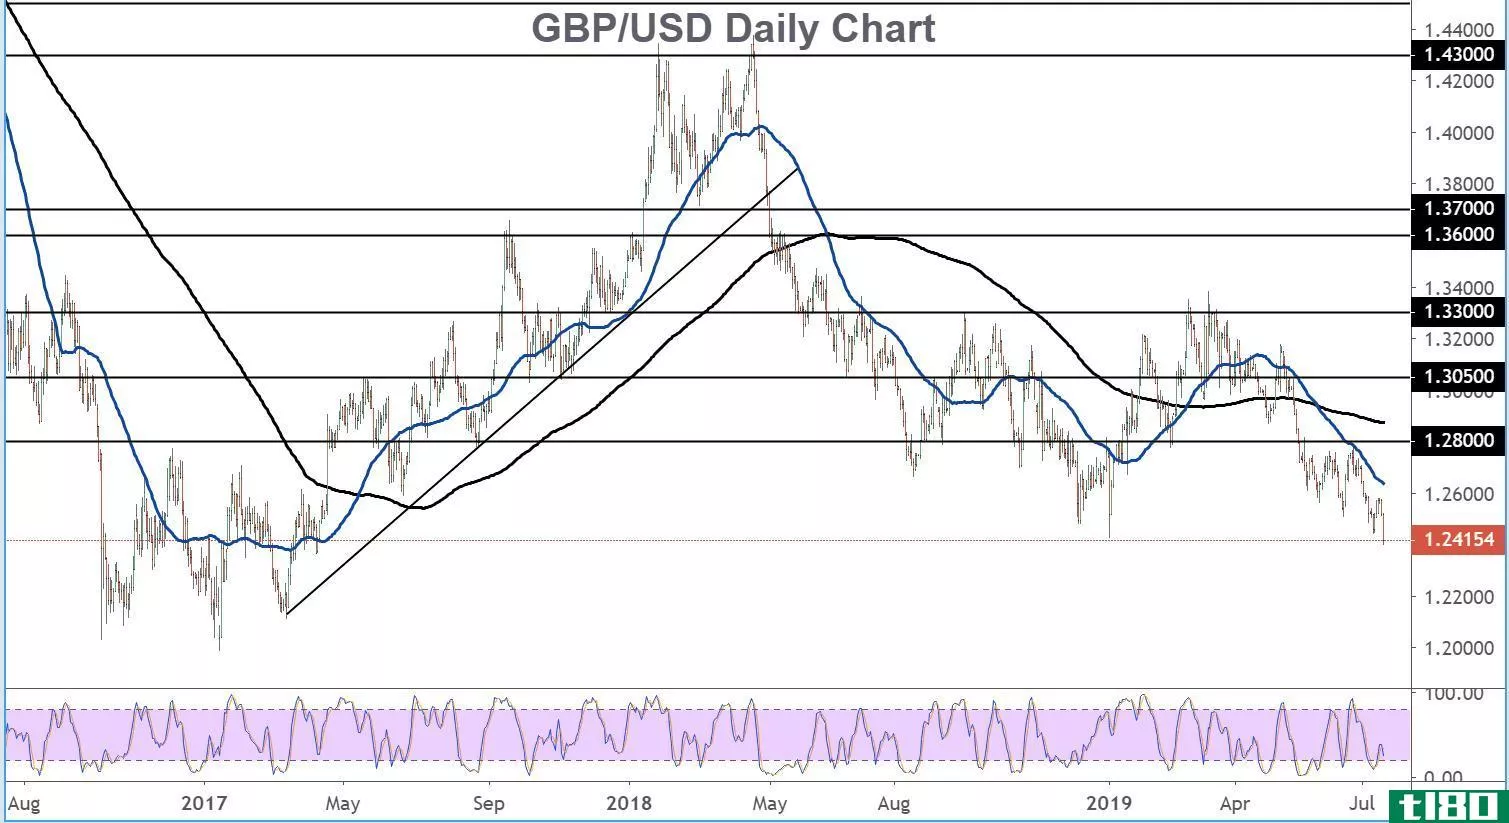 Chart showing the performance of the British pound vs. the U.S. dollar (GBP/USD)